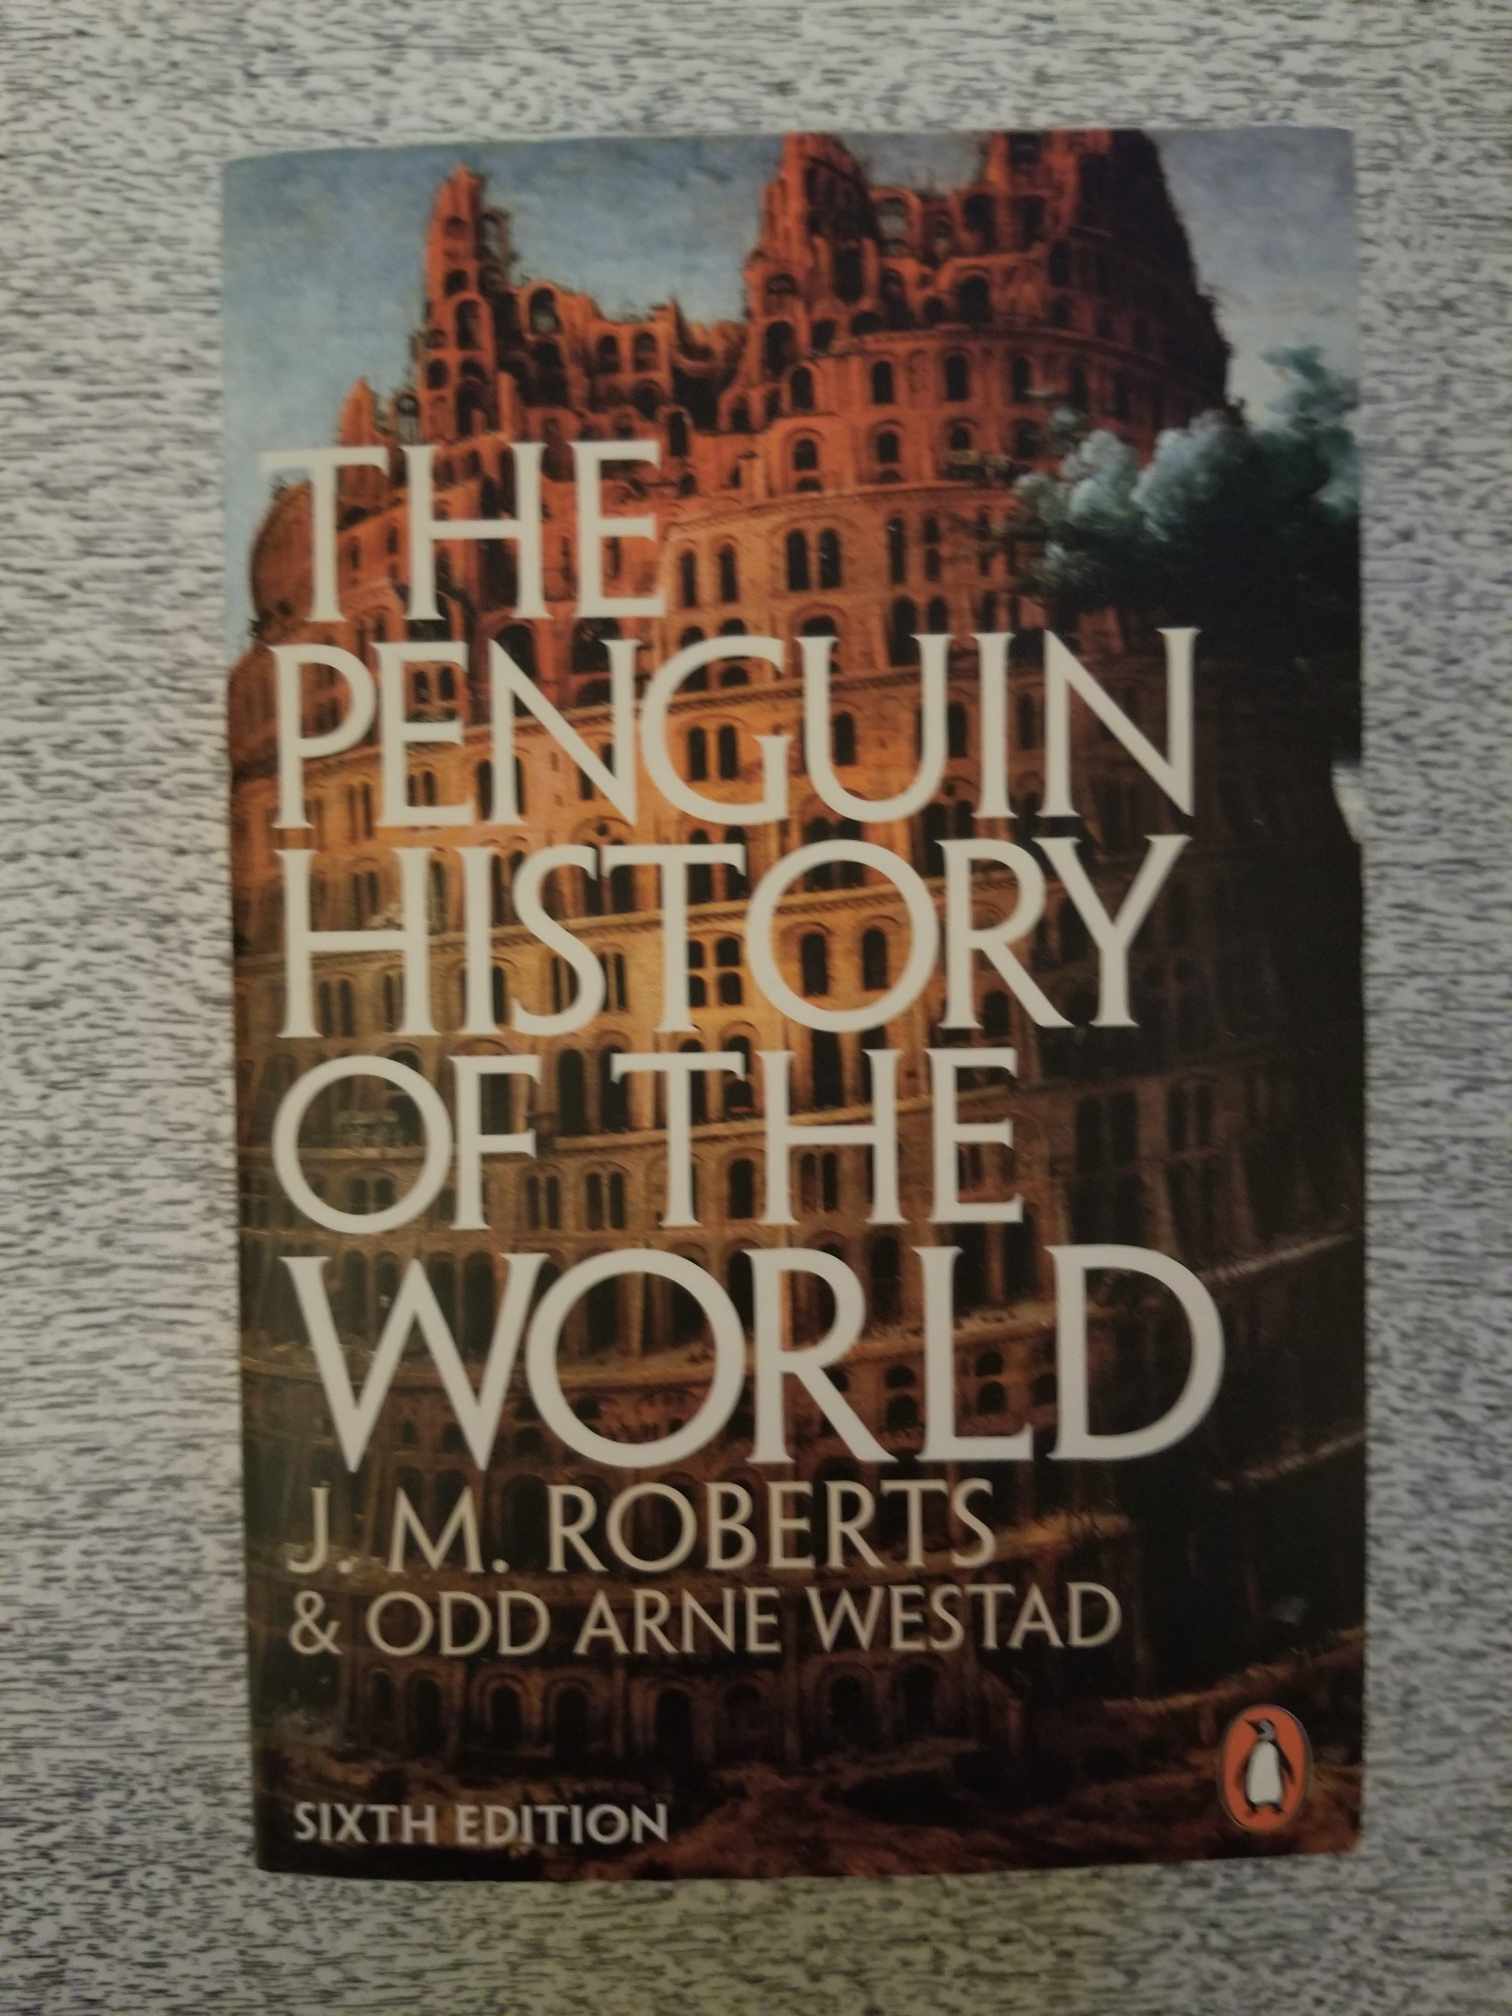 The Penguin History of the World by J.M. Roberts and Odd Arne Westad